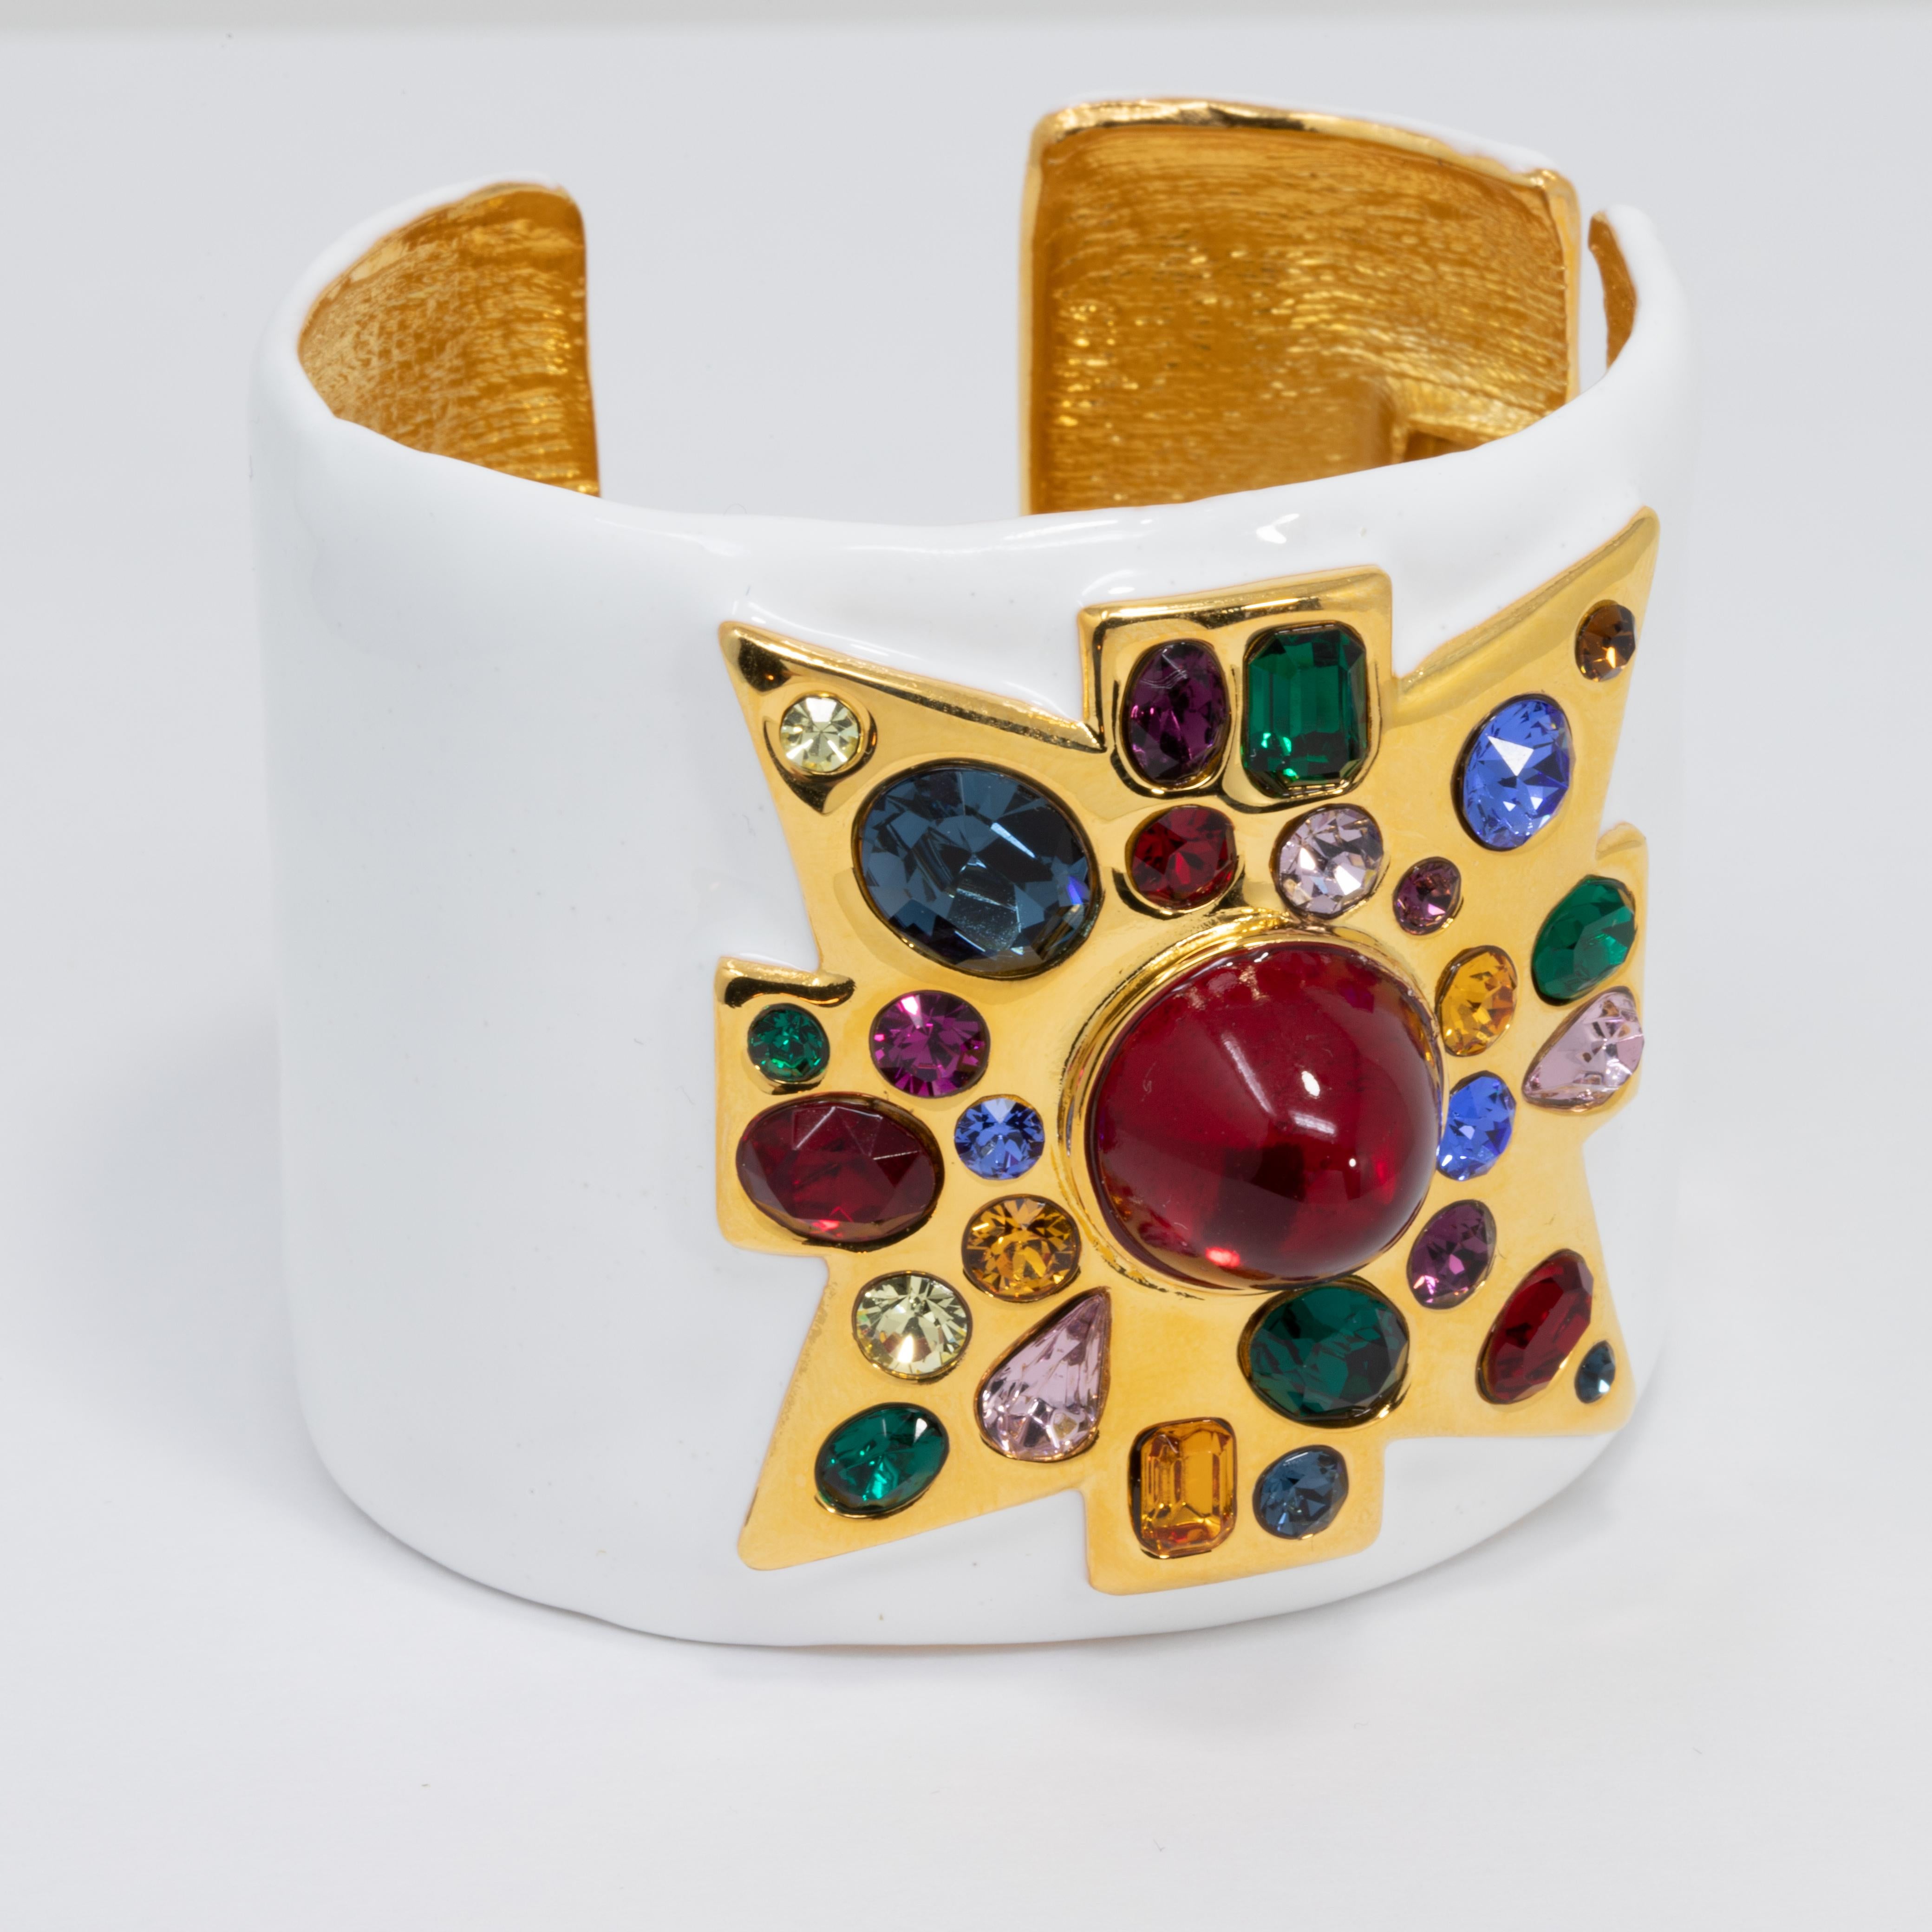 A stylish Kenneth Jay Lane cuff bracelet. Features a gold-plated cuff painted in white enamel. A bold maltese cross motif is accented with colorful crystals and a vibrant centerpiece red cabochon.

Hallmarks: KJL, Made in USA
Inner circumference: 3